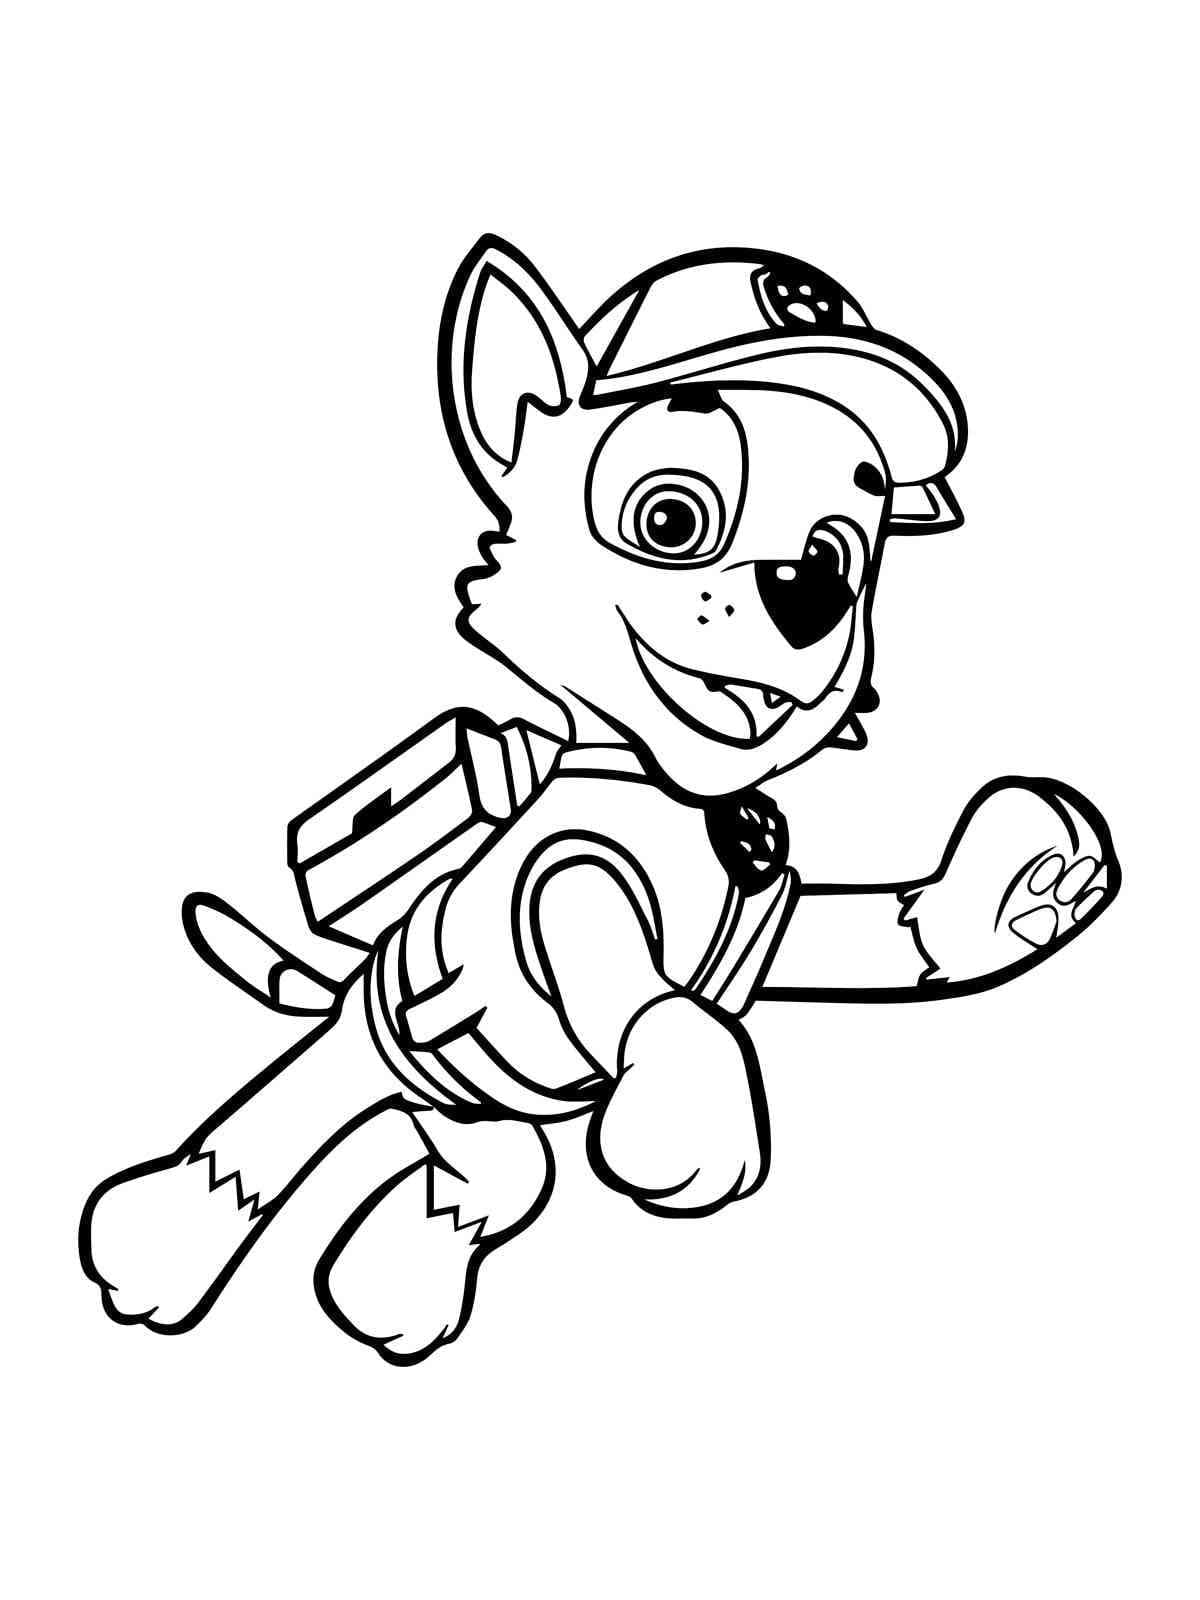 Happy rocky paw patrol coloring page